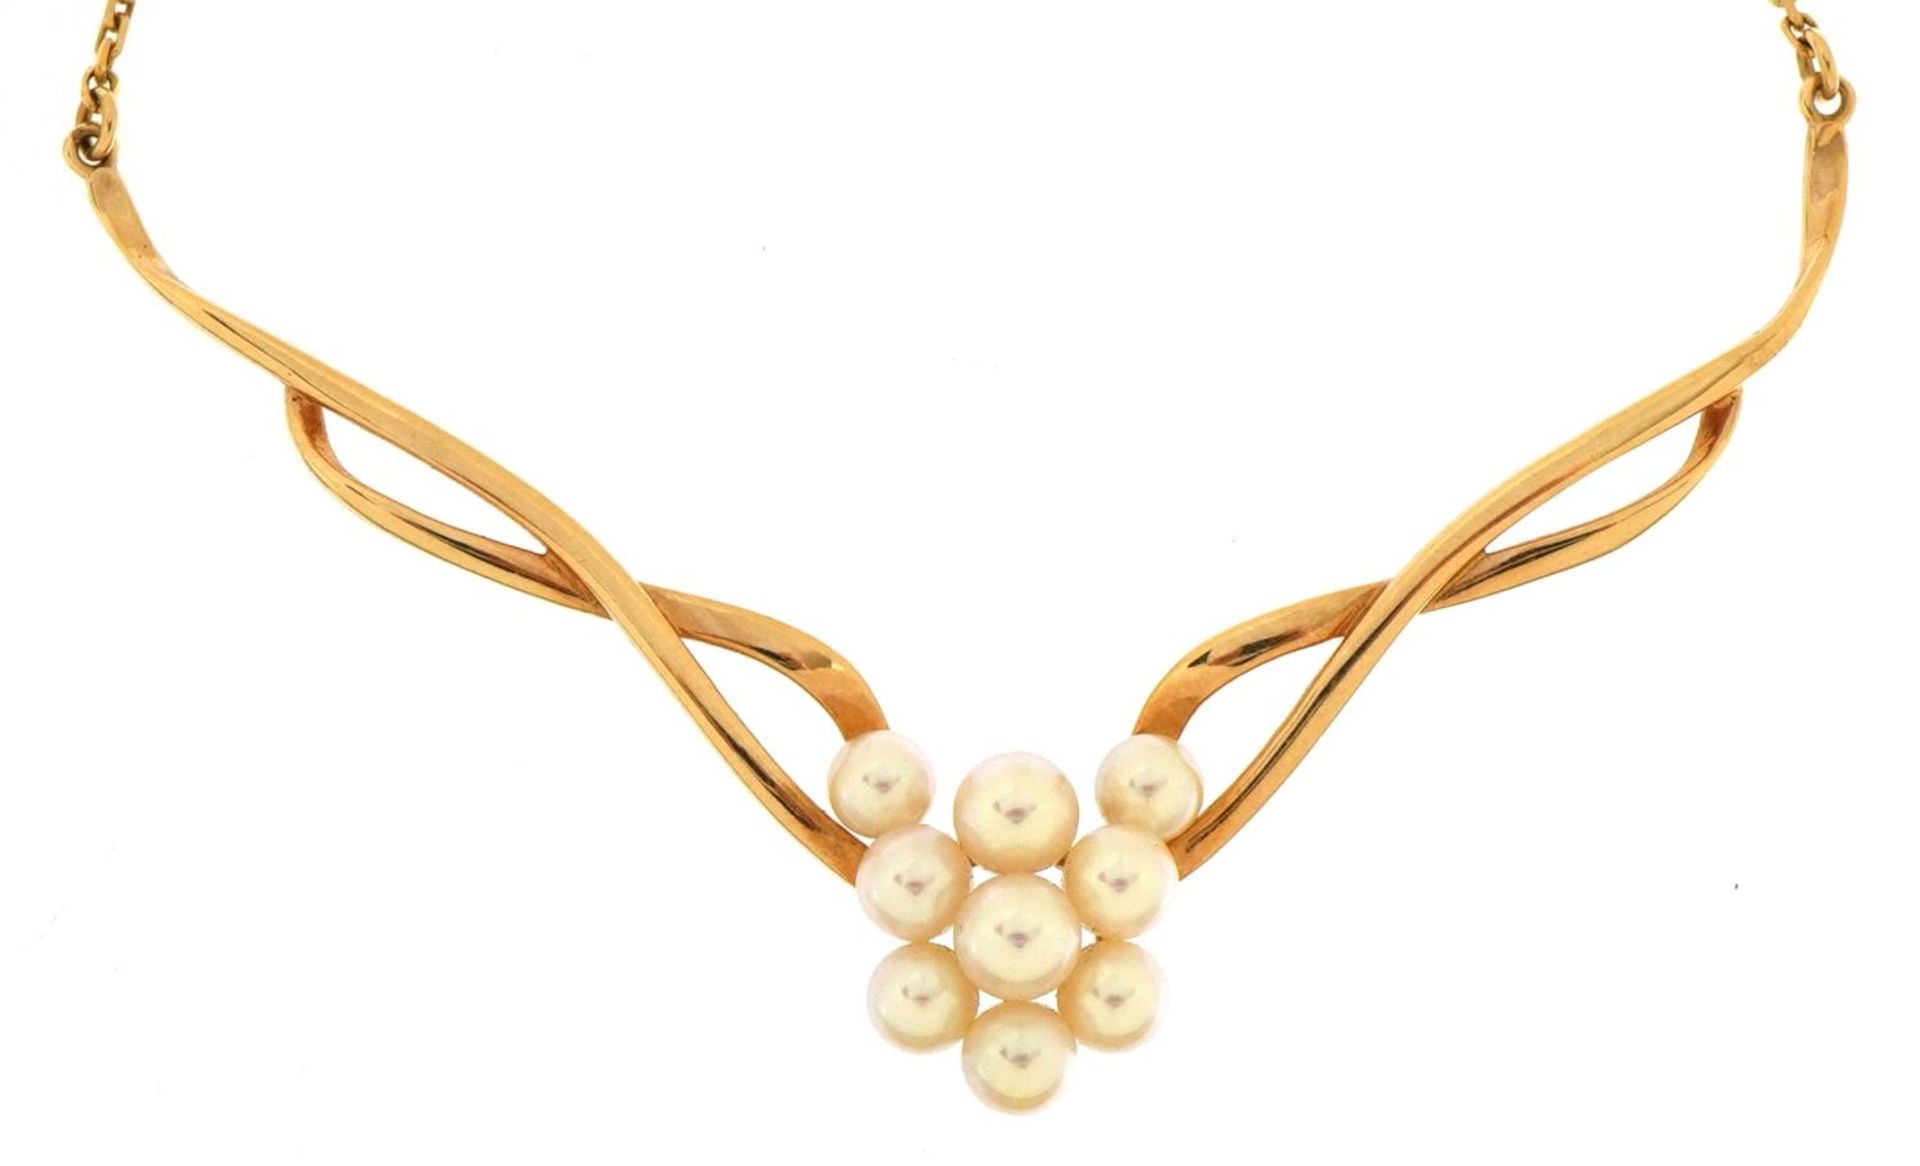 Mikimoto style 14k gold crossover pearl cluster pendant on an 18k gold necklace, overall 38.5cm in